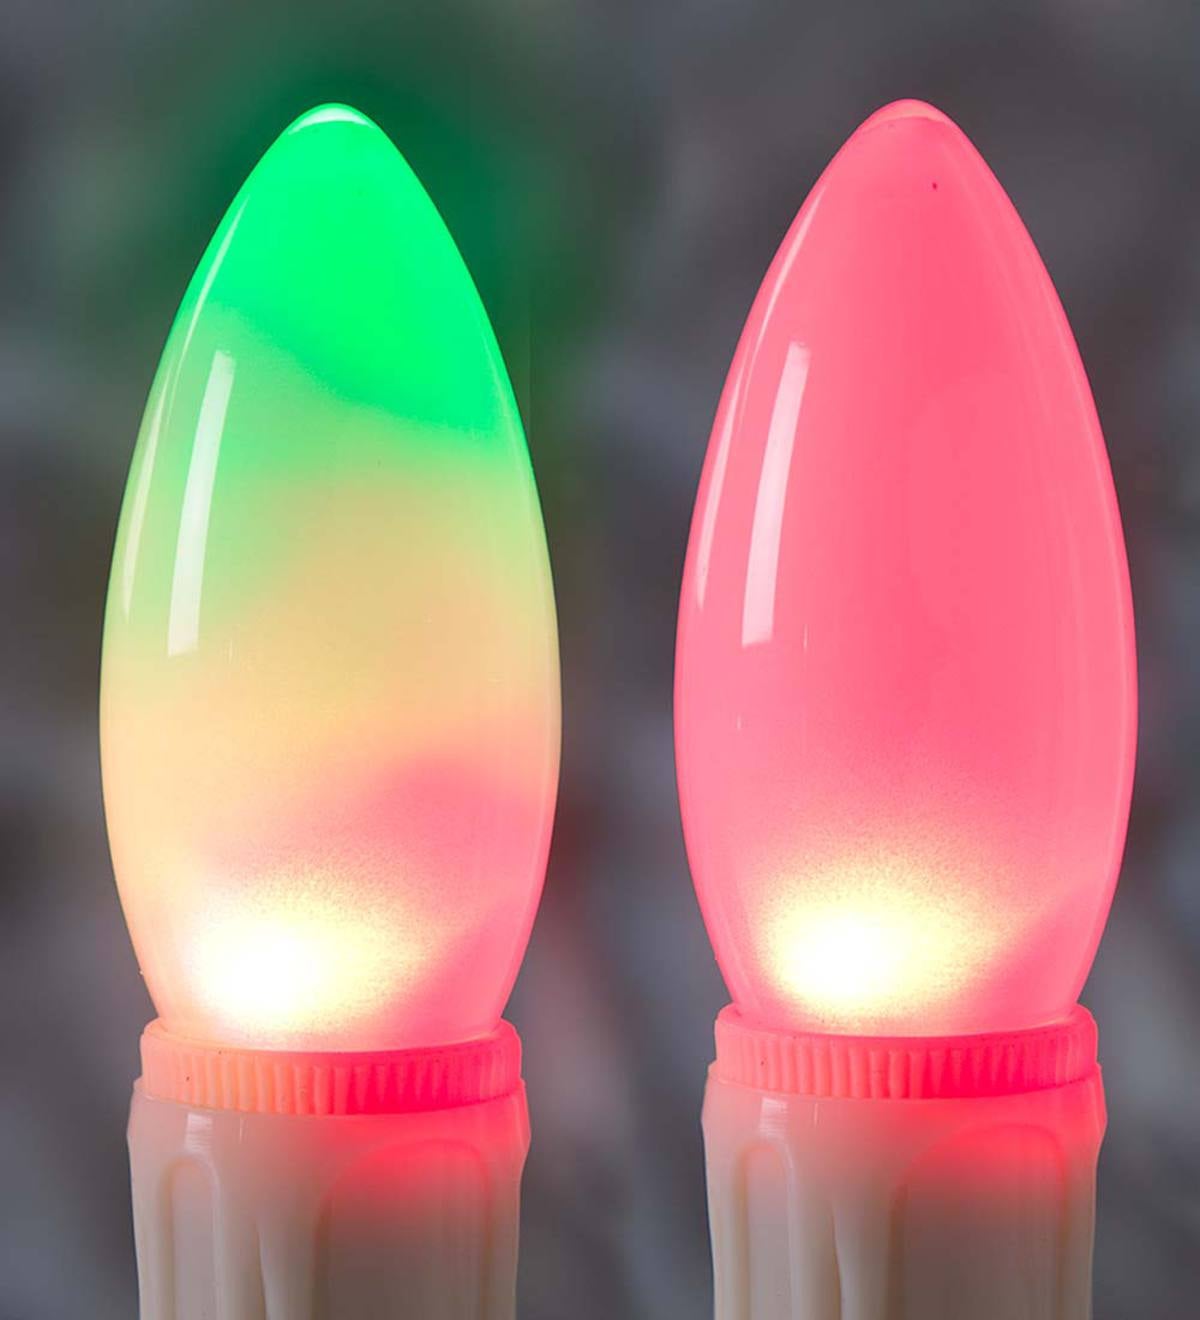 Color-Changing Replacement LED Bulbs for Window Candles, 2-Pack